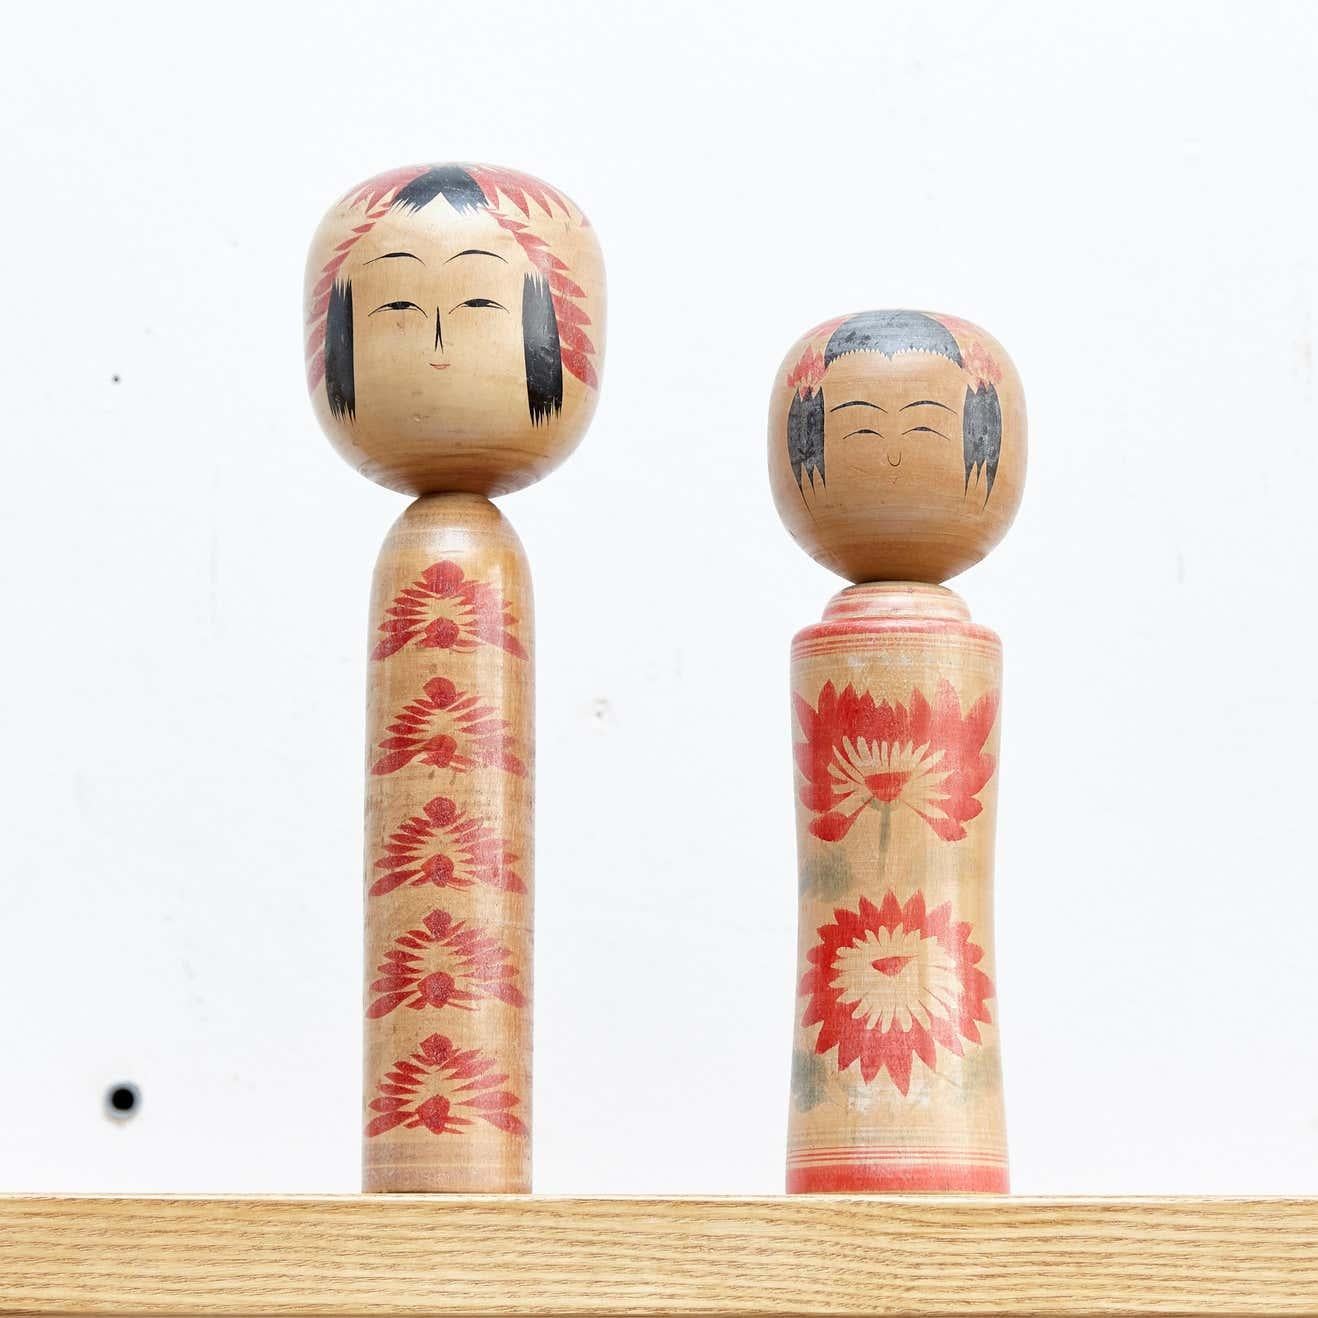 Japanese dolls called Kokeshi of the early 20th century.
Provenance from the northern Japan.
Set of 2.

Measures: 36 x 10 cm
30 x 7.5 cm

Handmade by Japanese Artisants from wood. Have a simple trunk as a body and an enlarged head. One